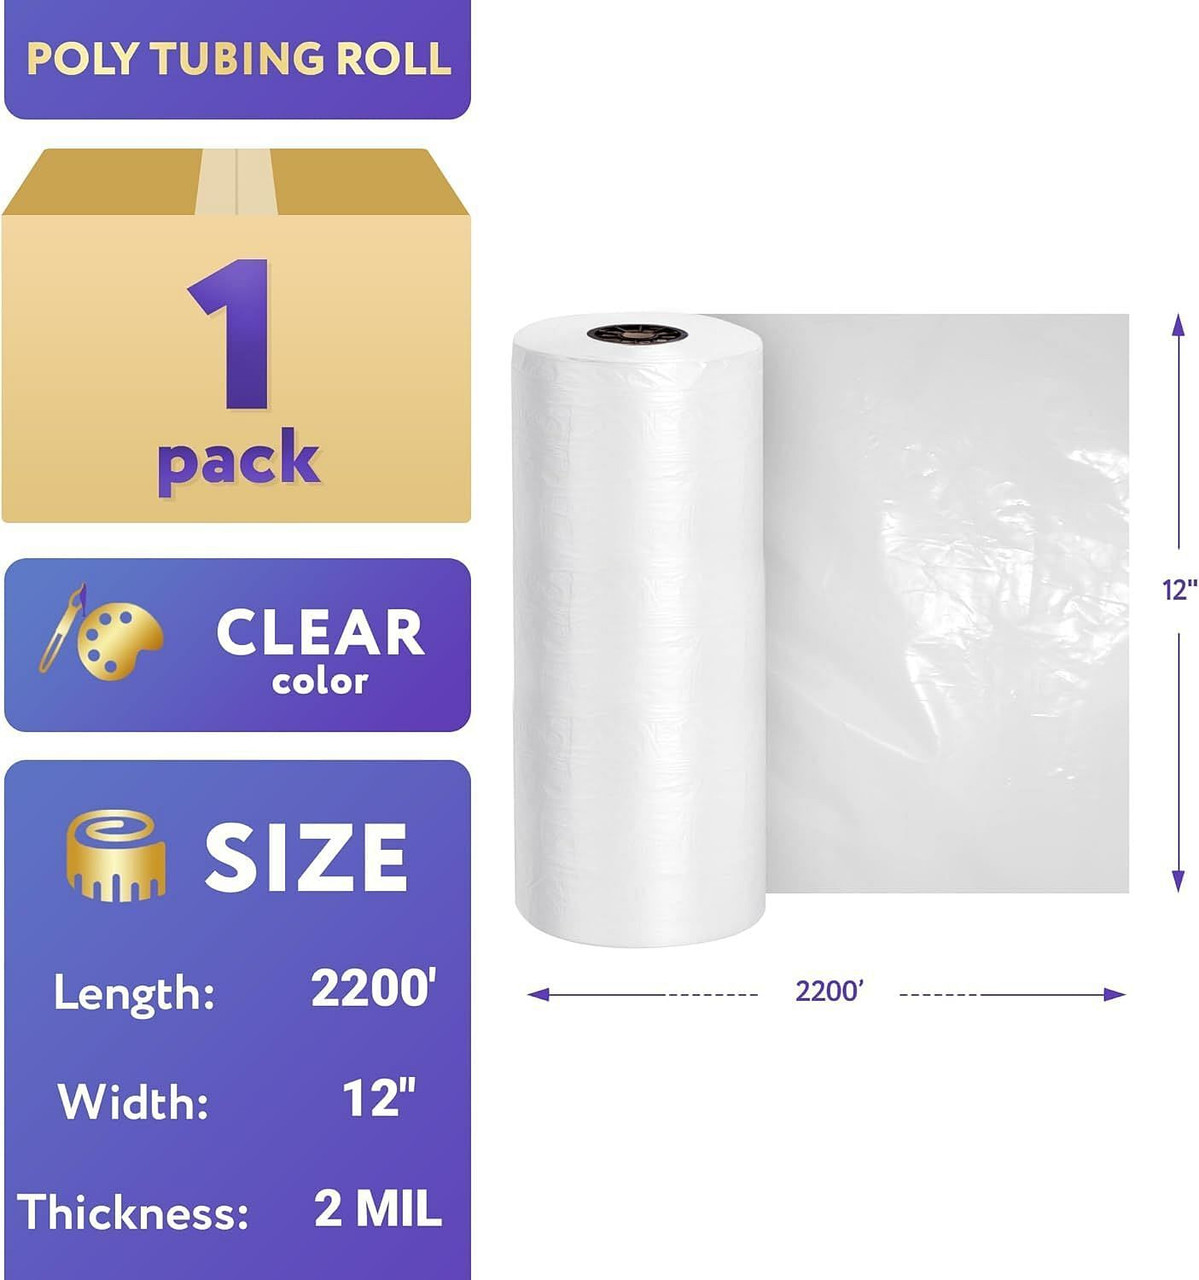 1 Pack of Poly Tubing on Roll; Clear 12" x 2200'. Thickness 2 Mil. Polyethylene Packaging for Light